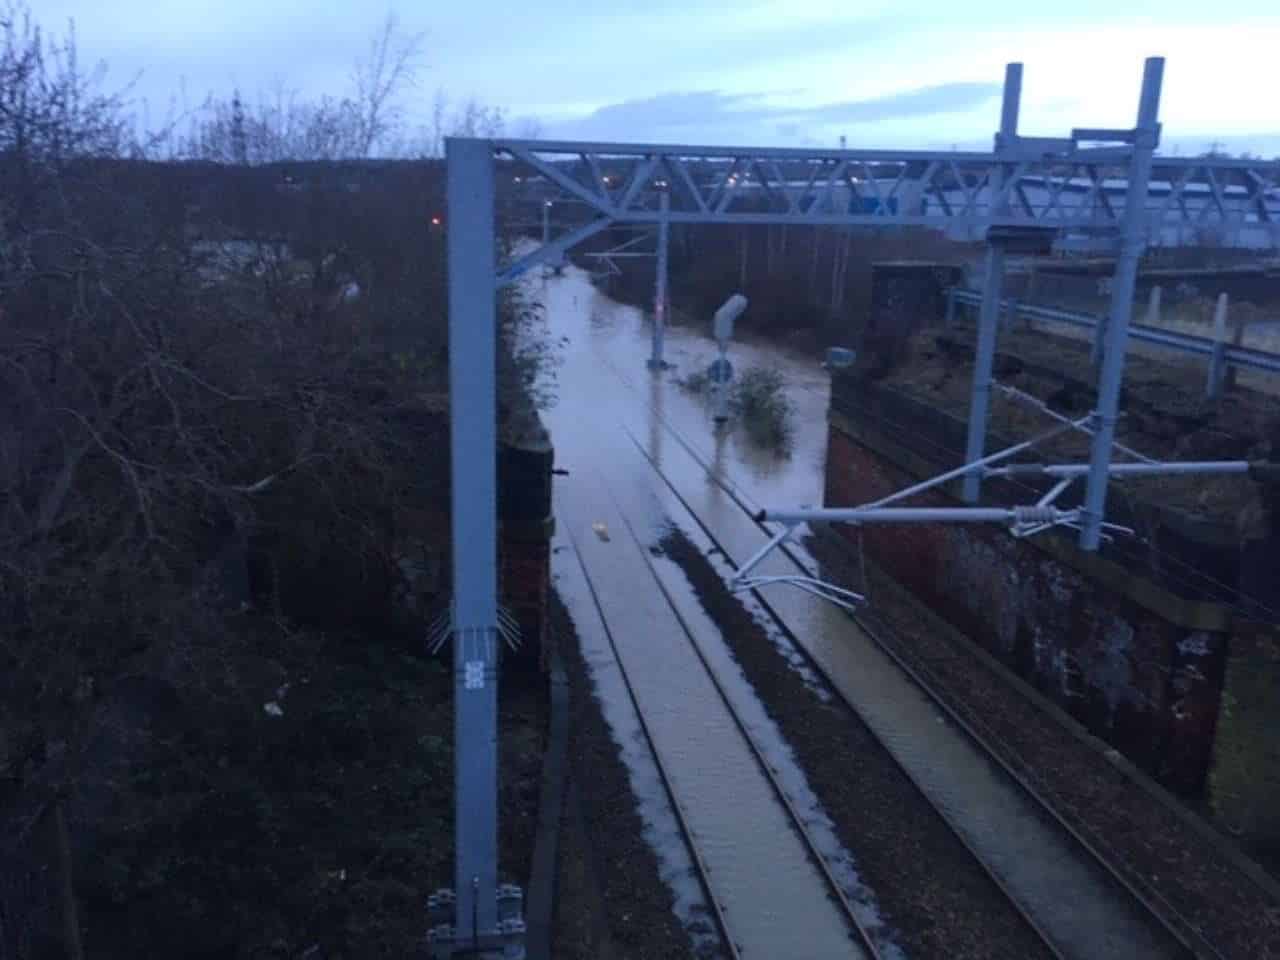 Rail passengers in South Yorkshire urged to check before travelling tomorrow as severe flooding closes railway line in Rotherham